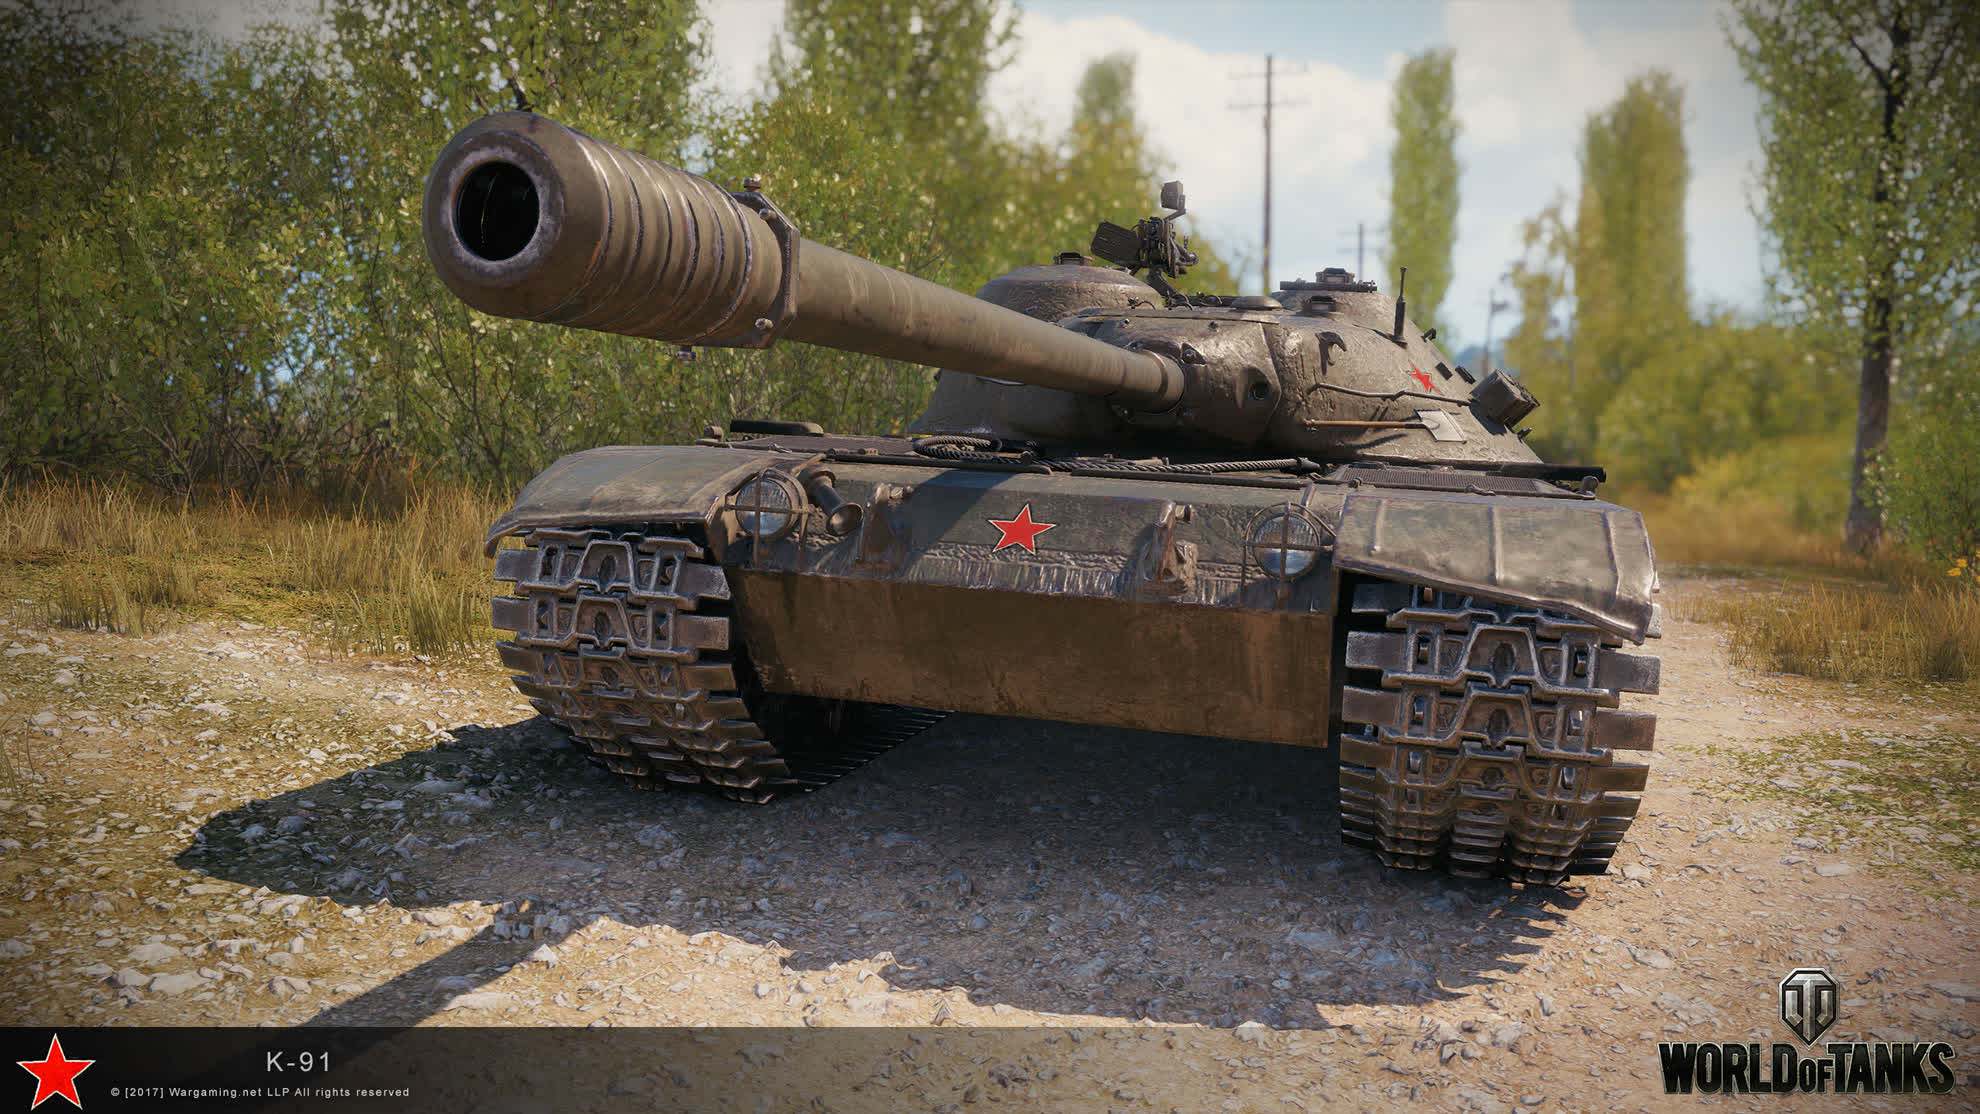 World of Tanks developer is quitting Russia and Belarus